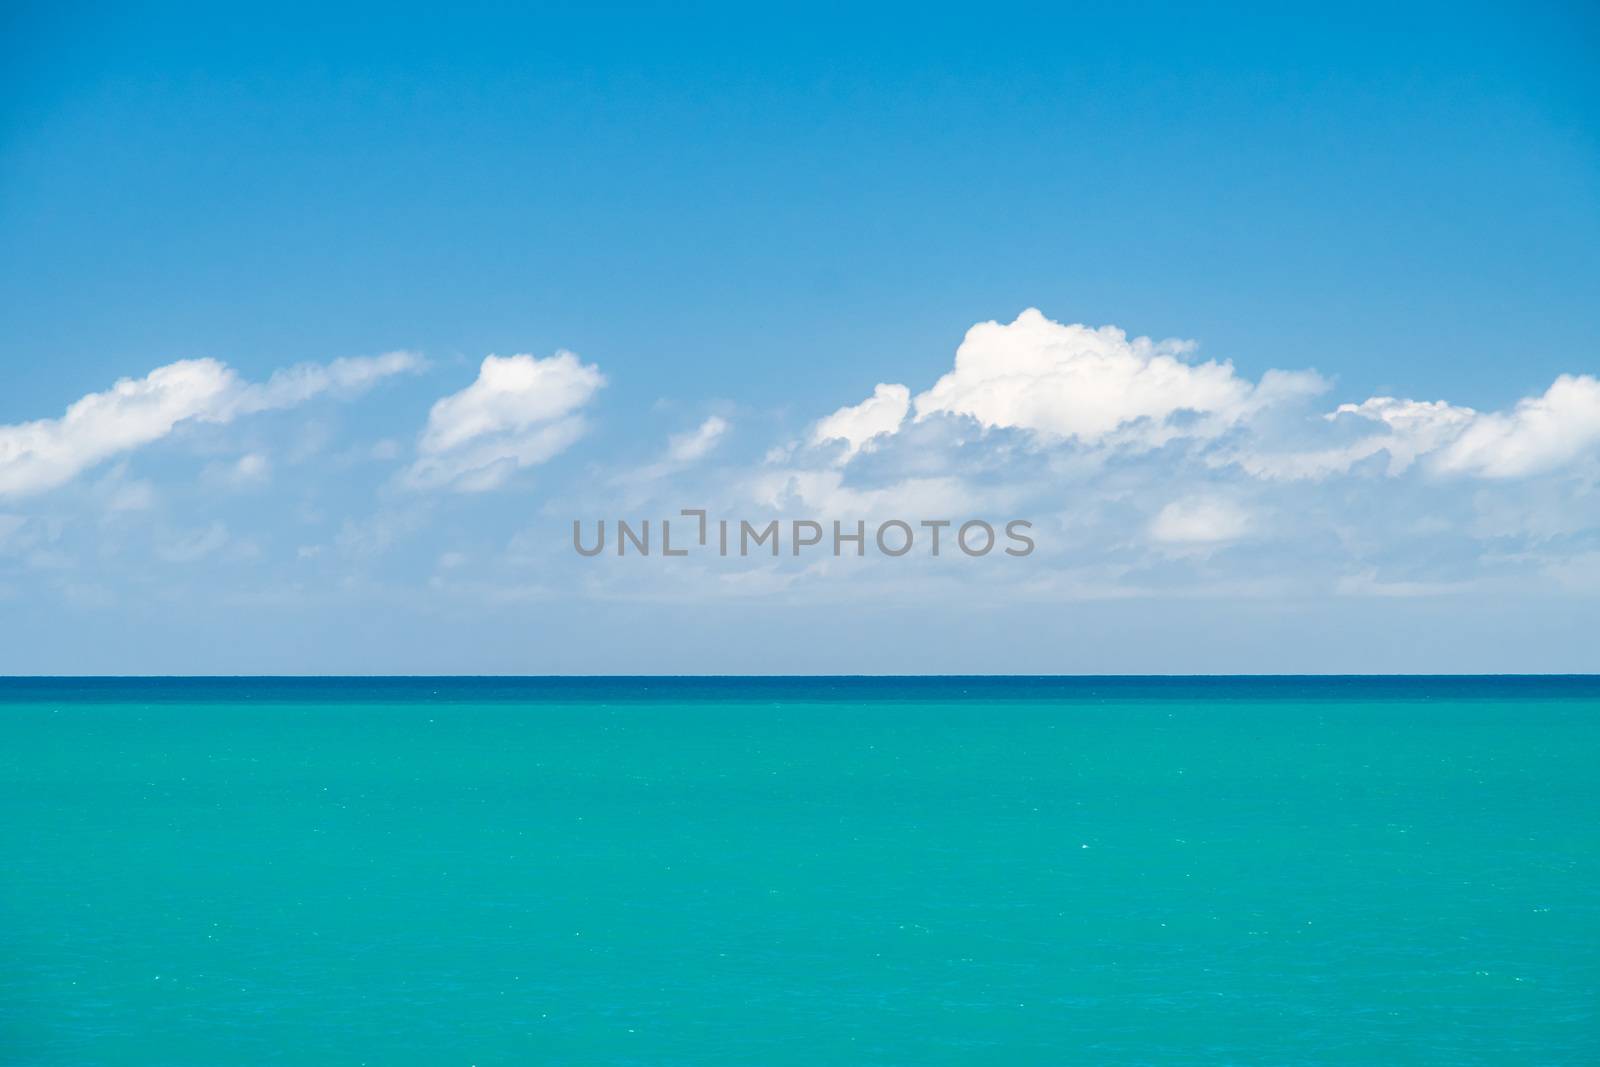 The ocean, the blue sky and white clouds by mauricallari